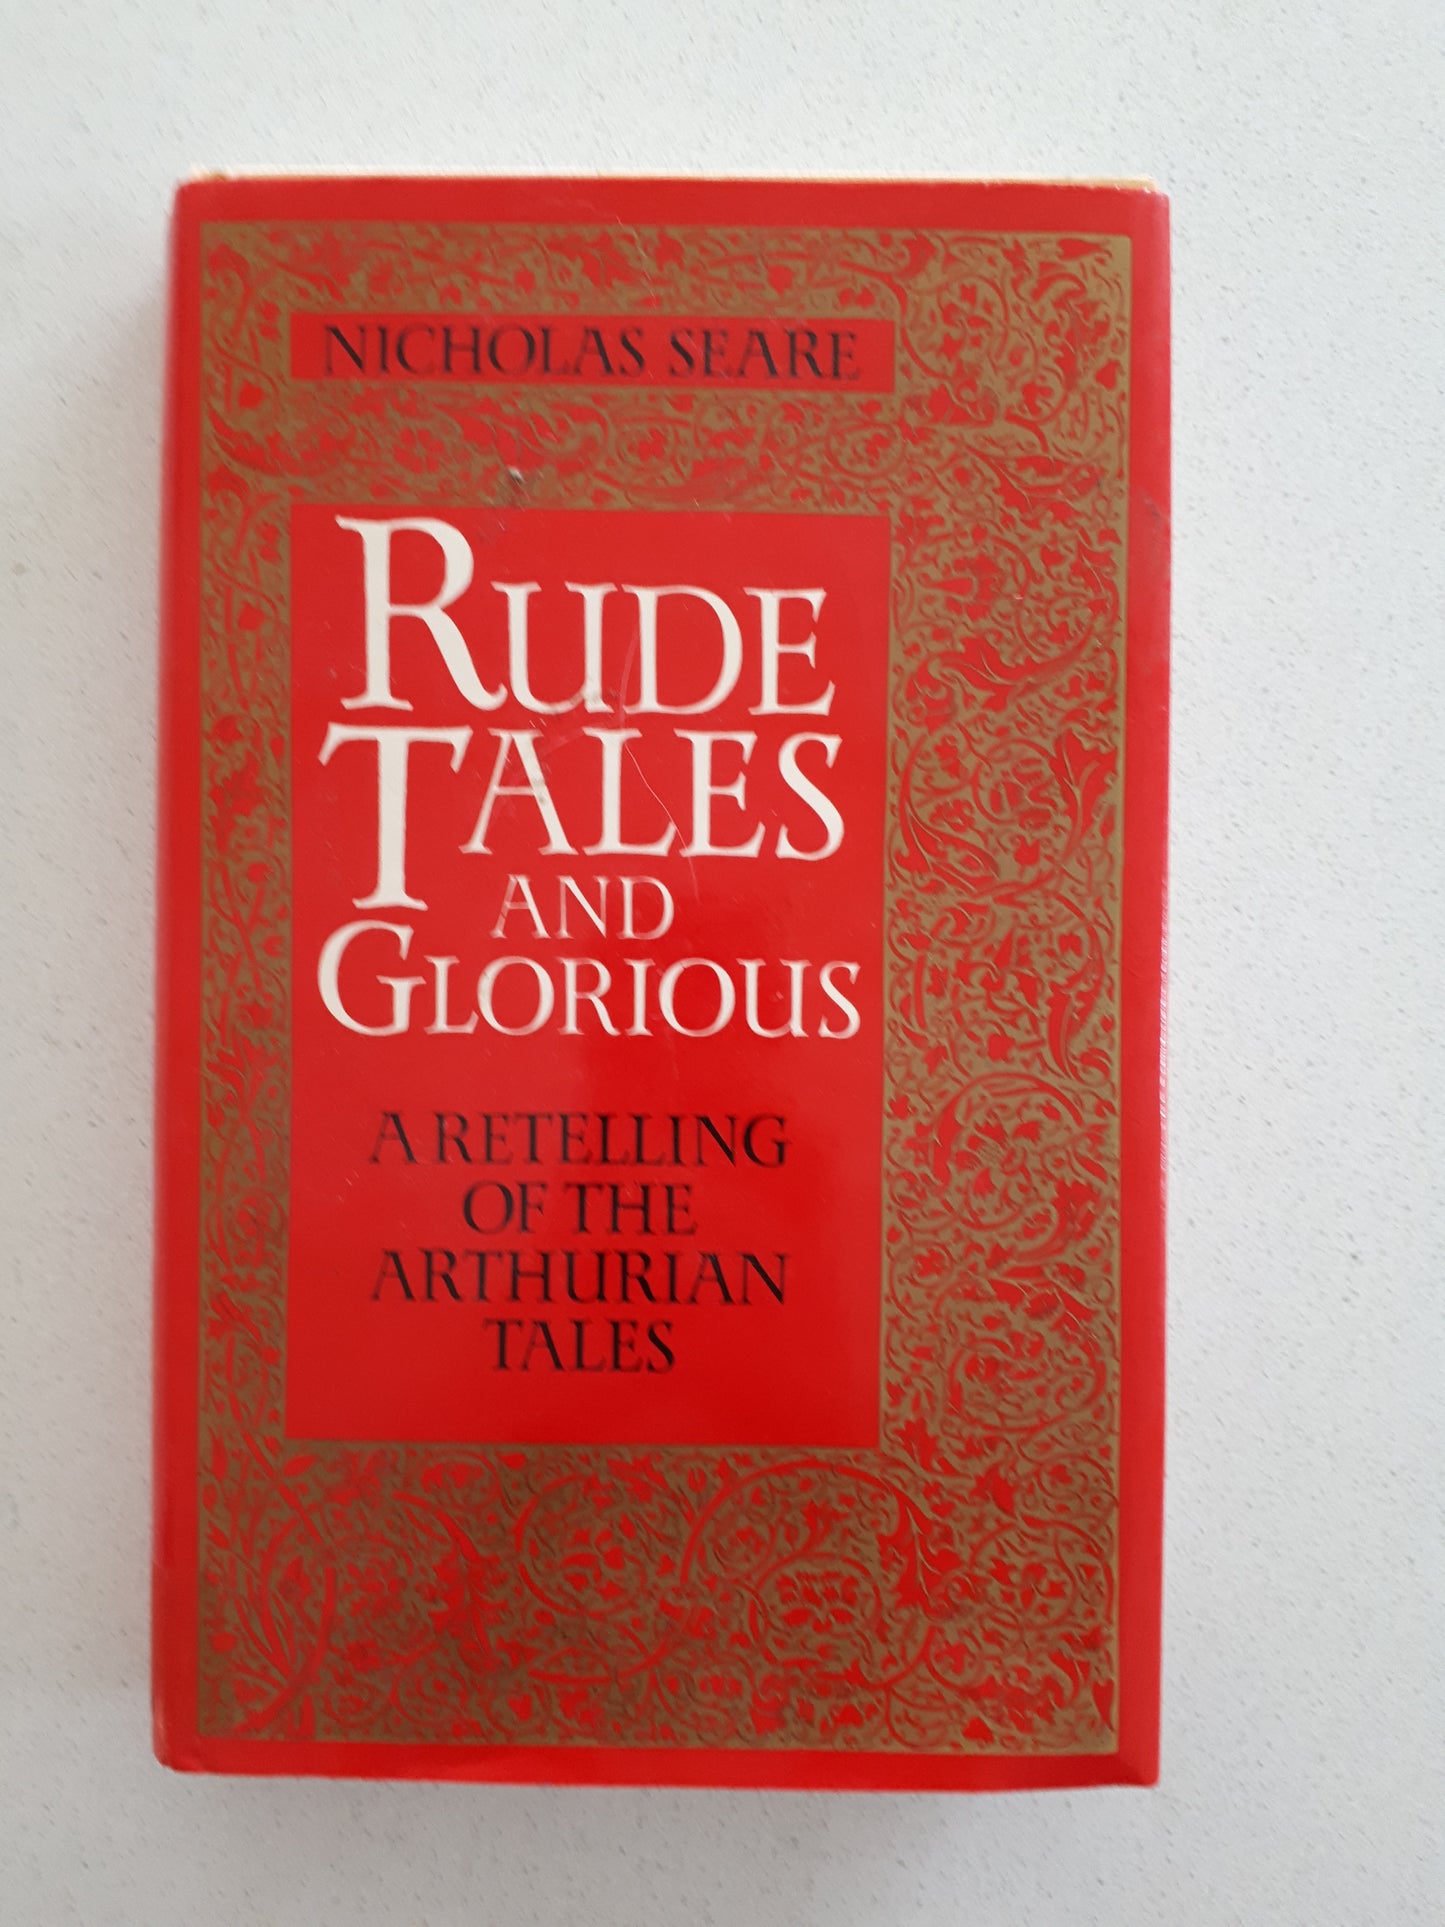 Rude Tales And Glorious by Nicholas Seare